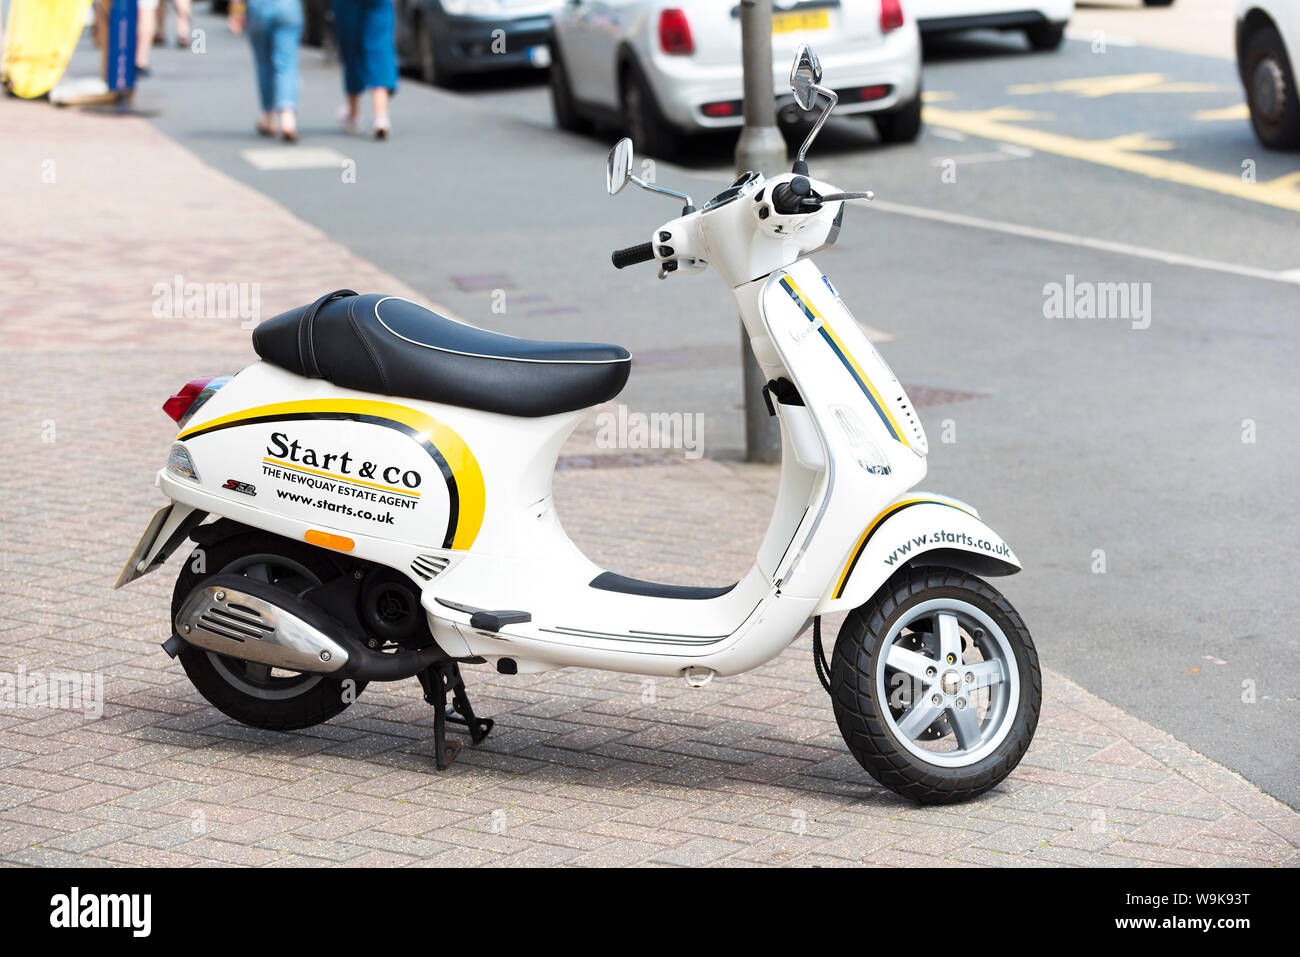 A Vespa scooter advertising Start & Co Estate Agents in Newquay in Cornwall. Stock Photo